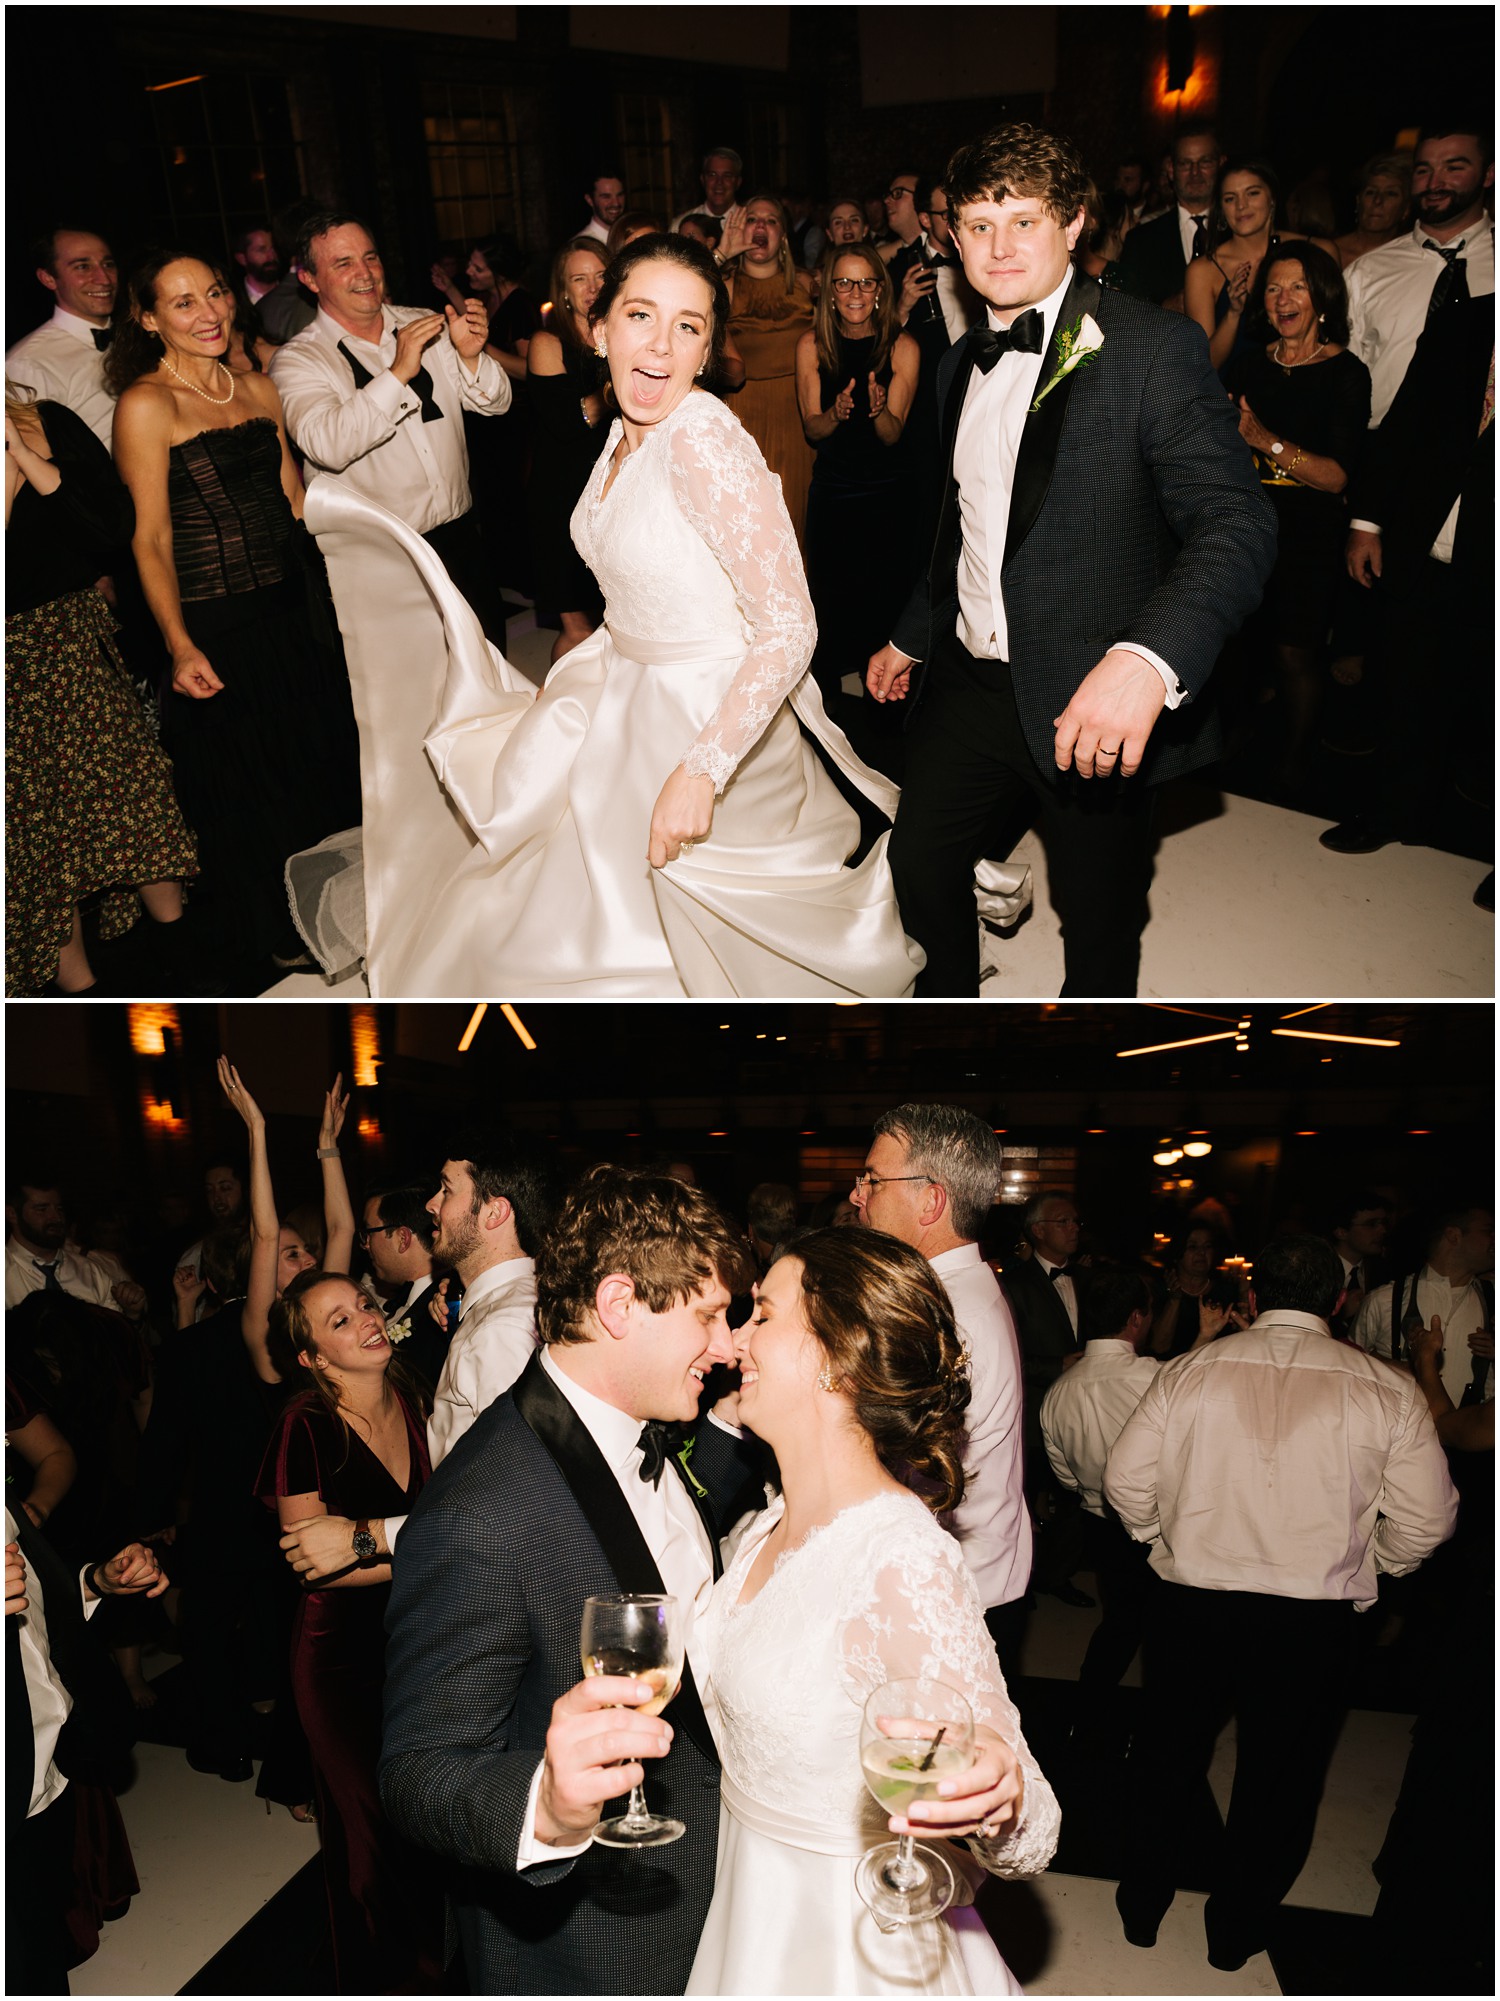 wedding reception moments with bride and groom photographed by Chelsea Renay Photography